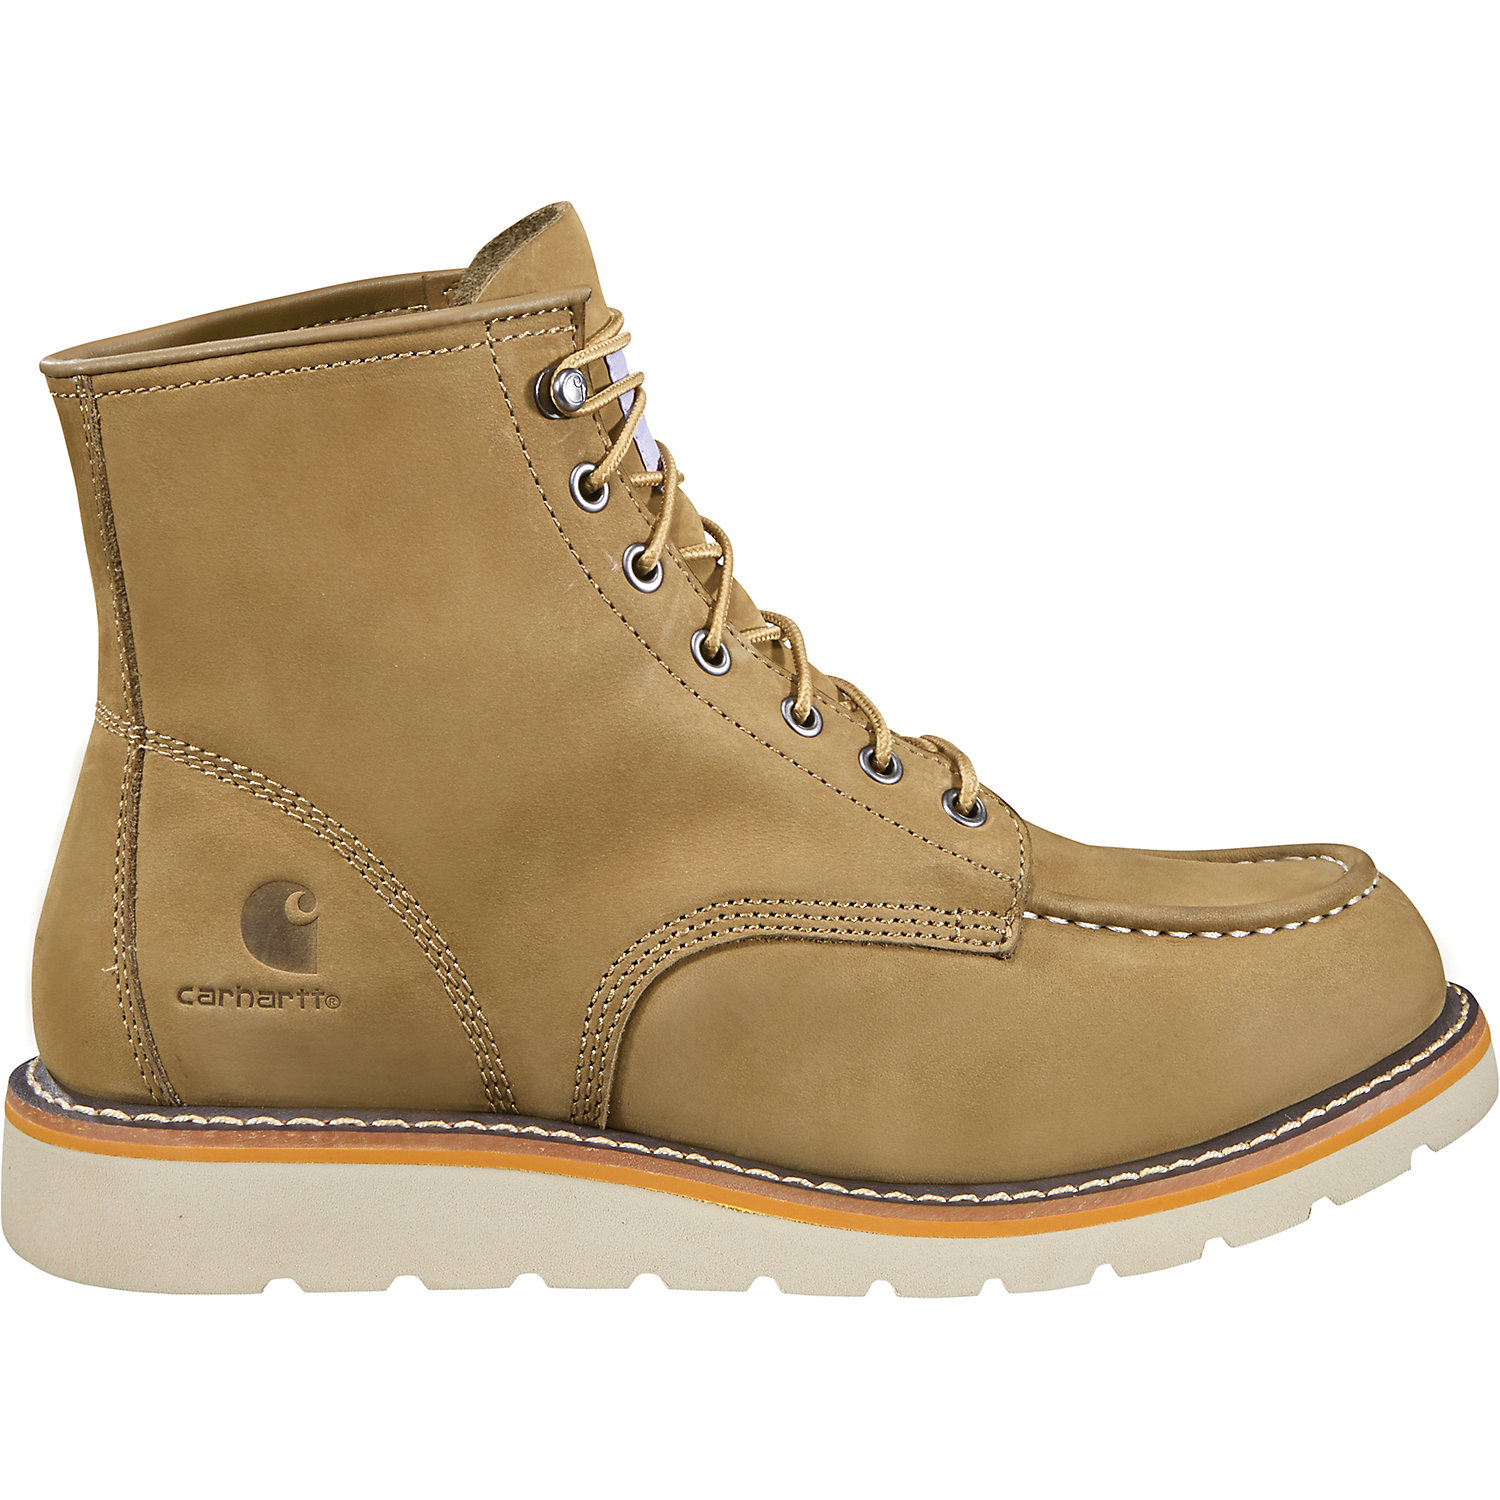 Carhartt Mens 6 Inch Moc Toe Wedge Boot - Non-Safety Toe